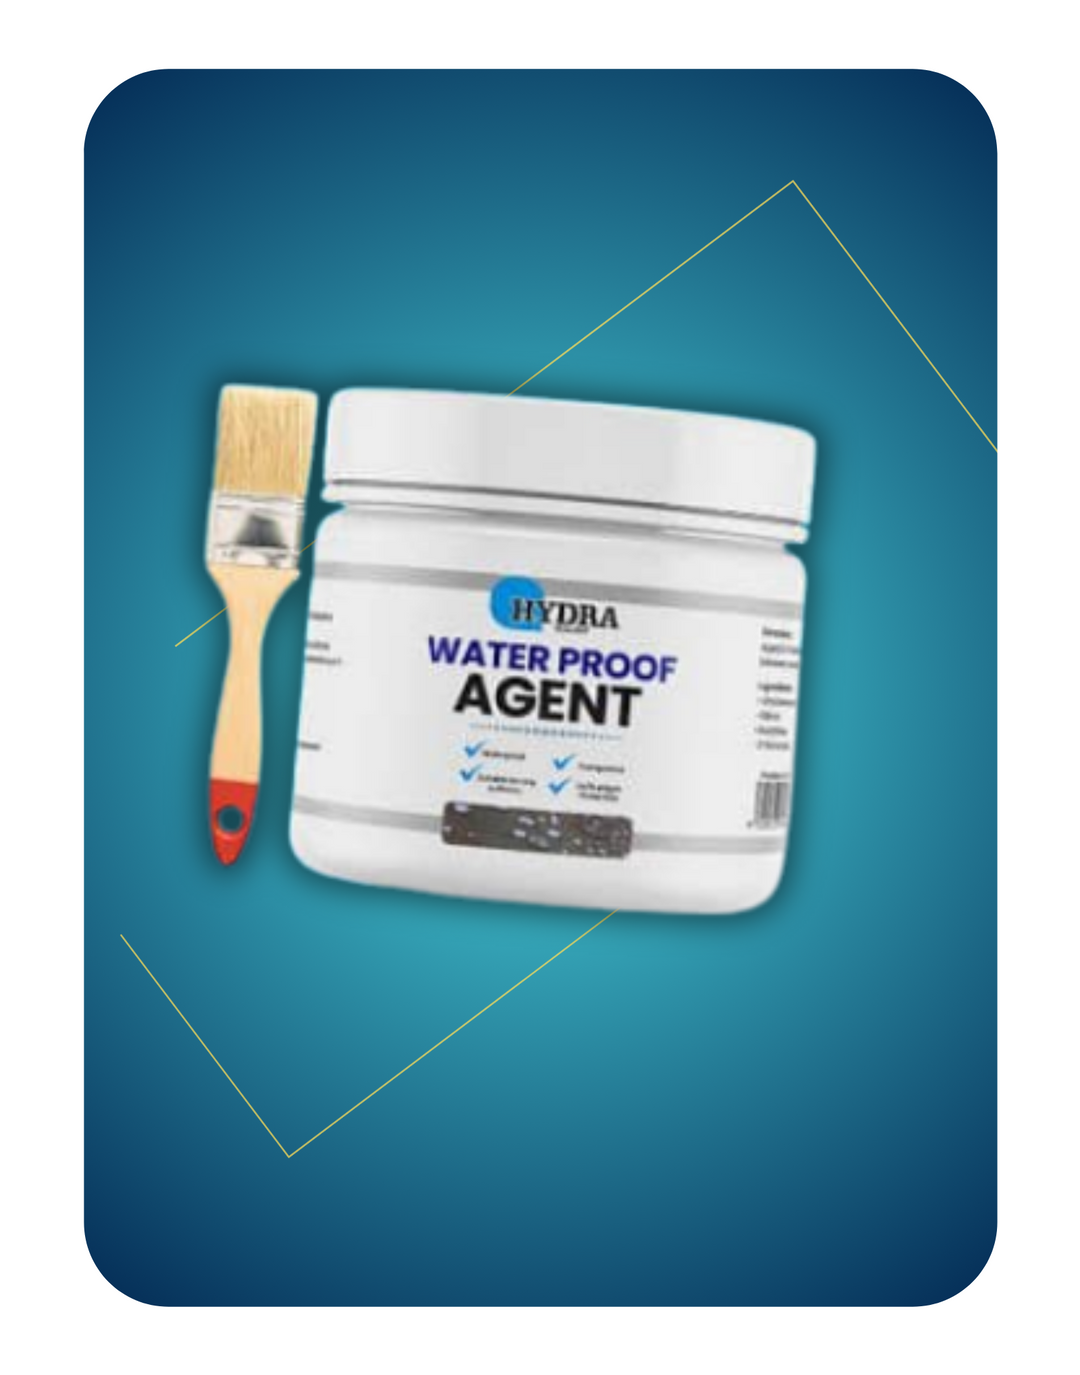 Hydra Waterproof Agent (300g Packaged in Box)